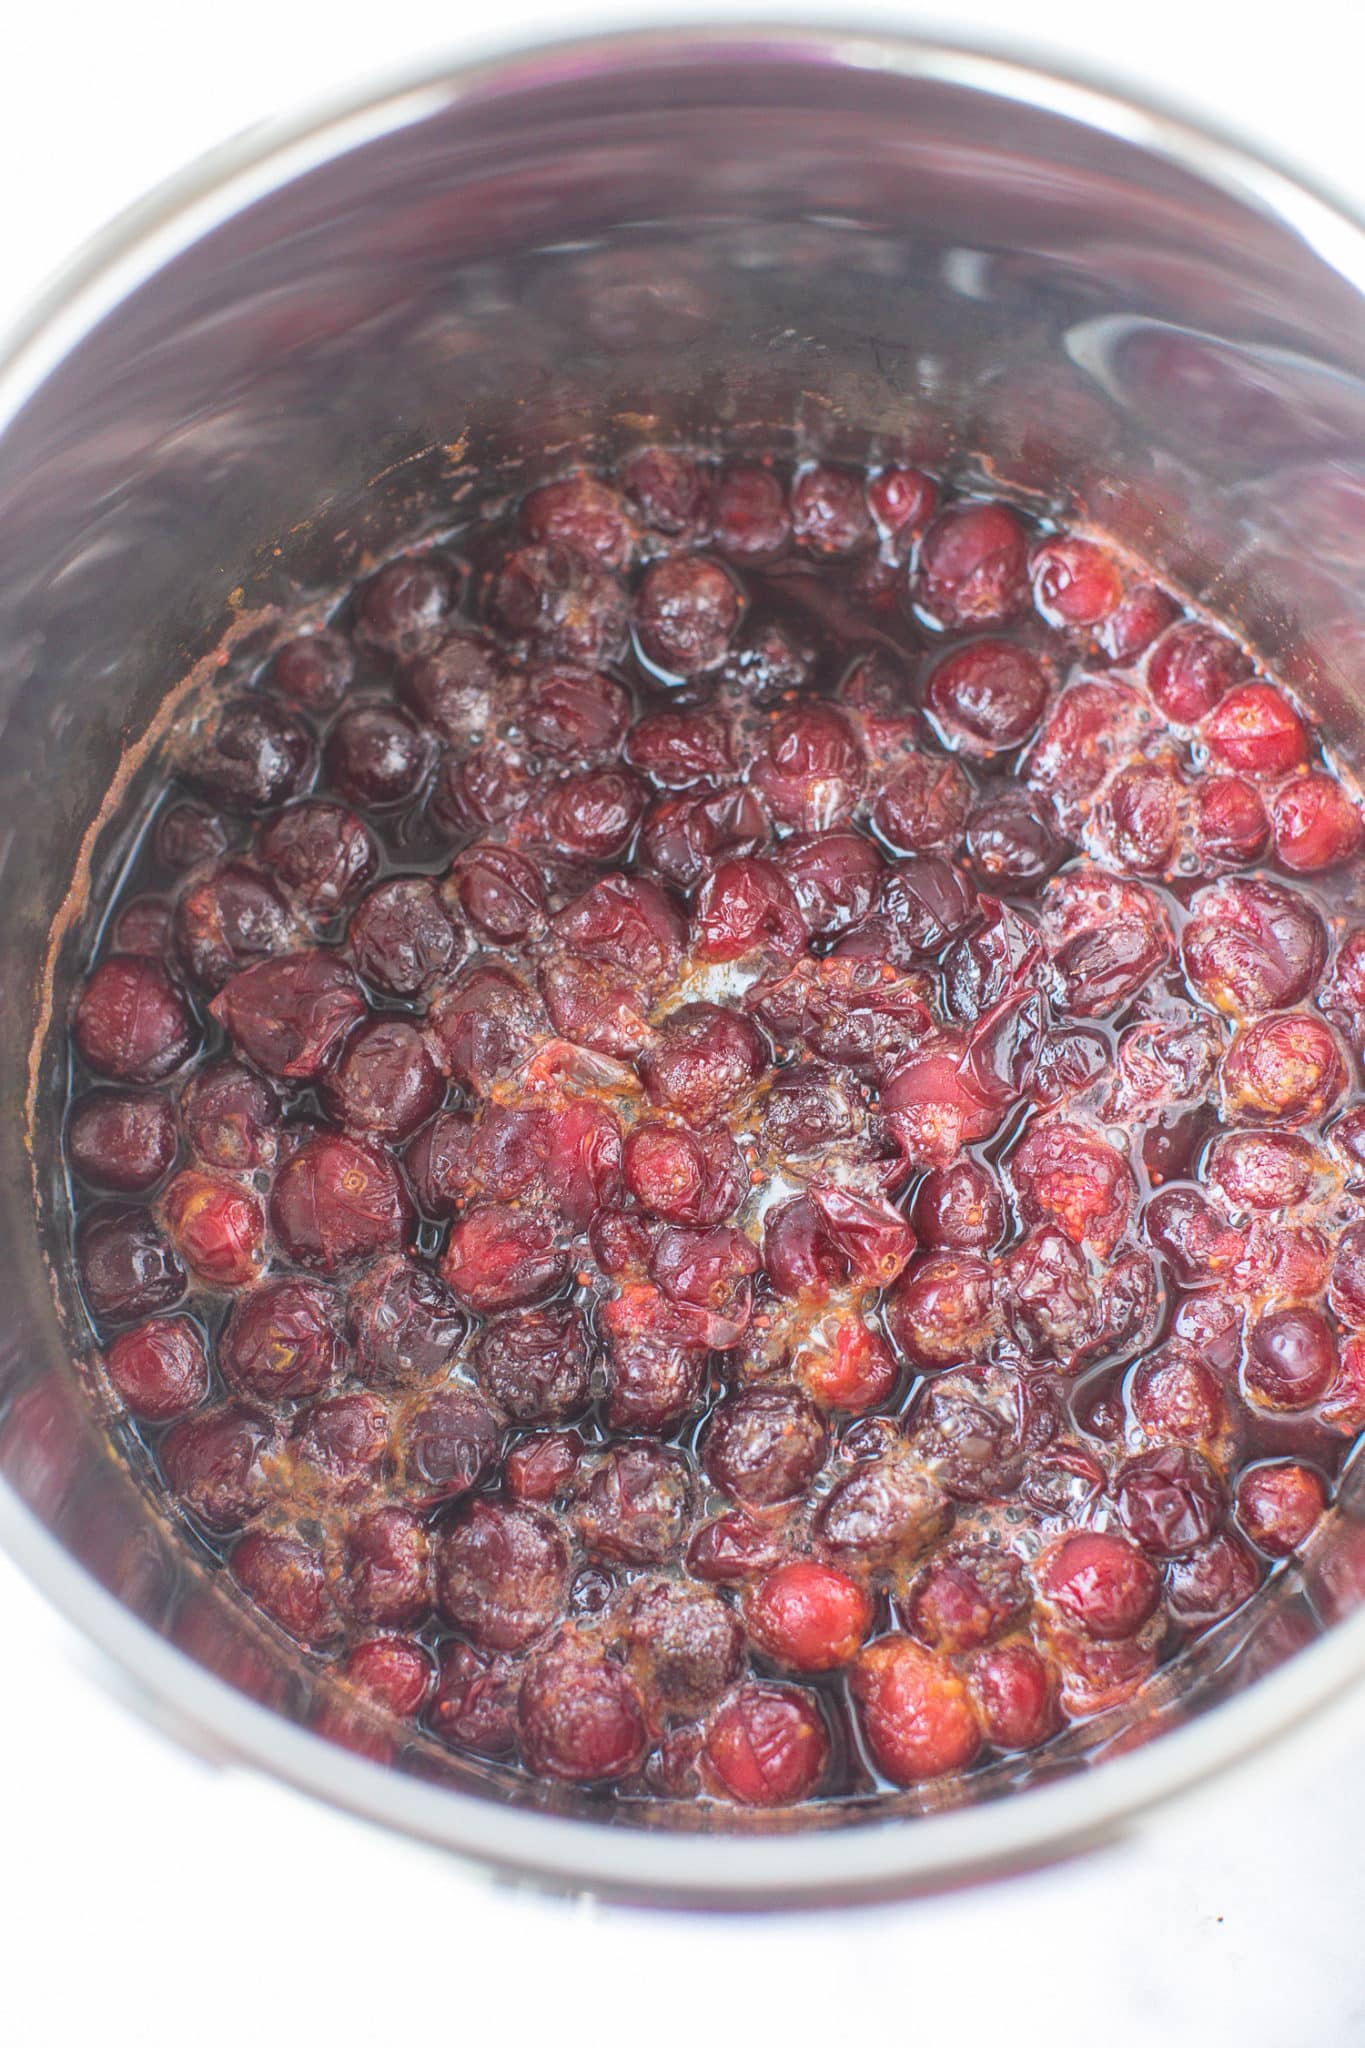 cooked cranberry relish in an instant pot pressure cooker.